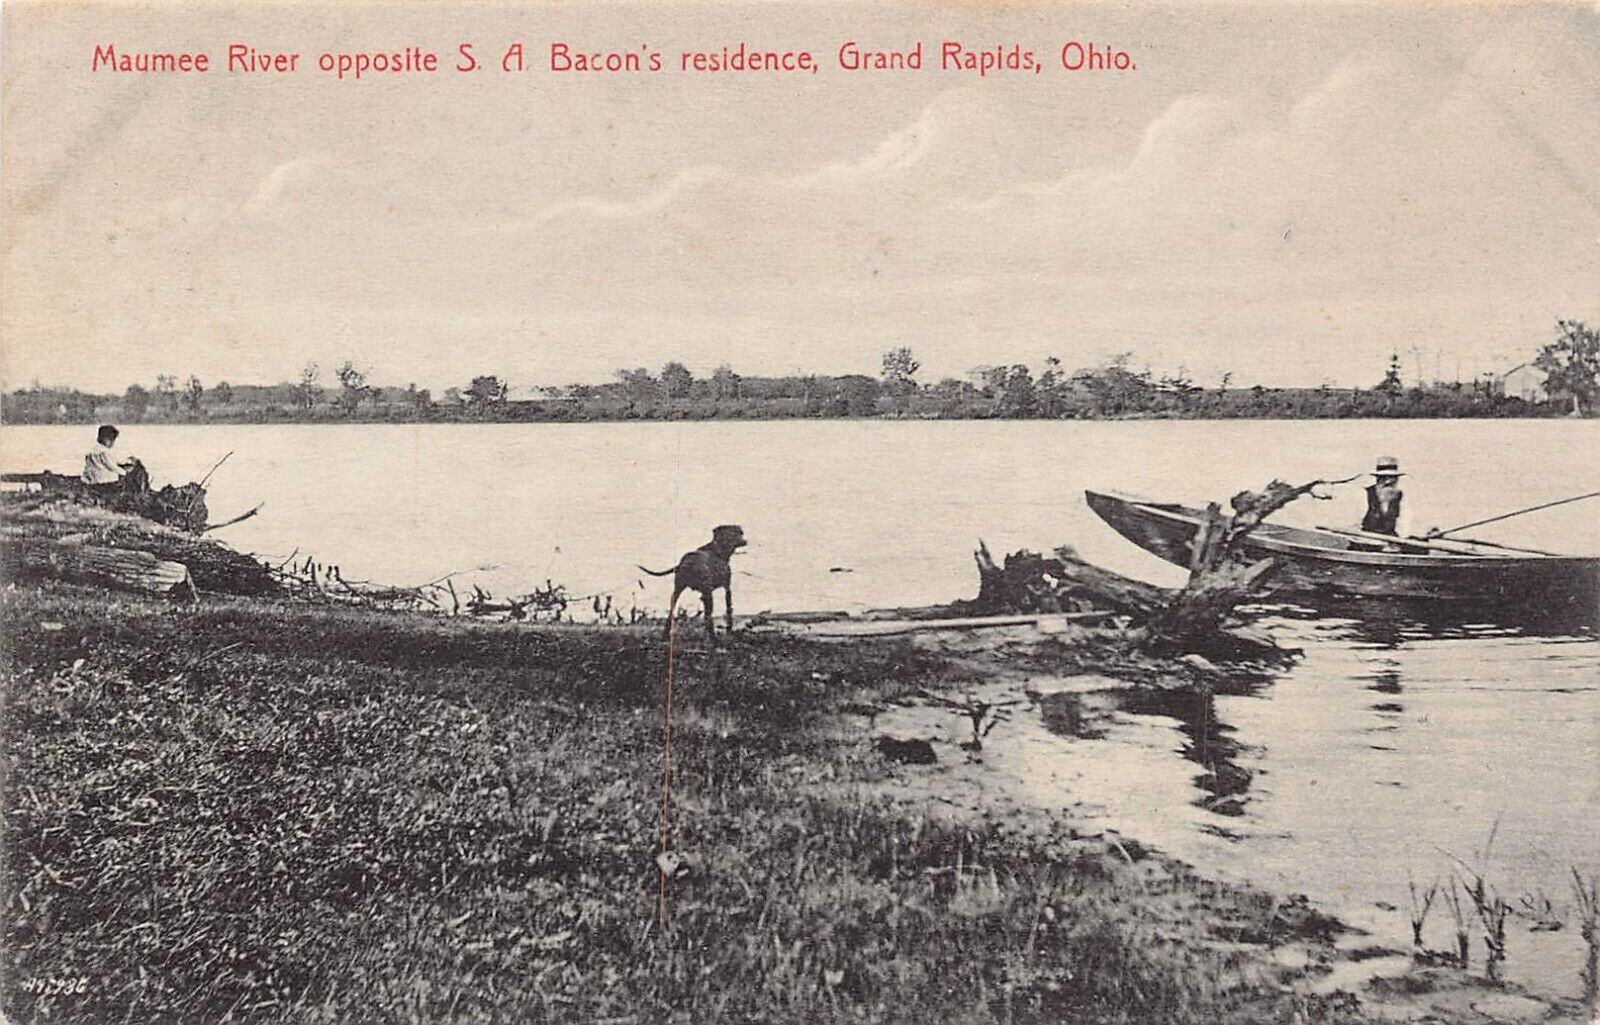 Grand Rapids Ohio Maumee River Lucas County Mansion S. A. Bacon Vtg Postcard A5